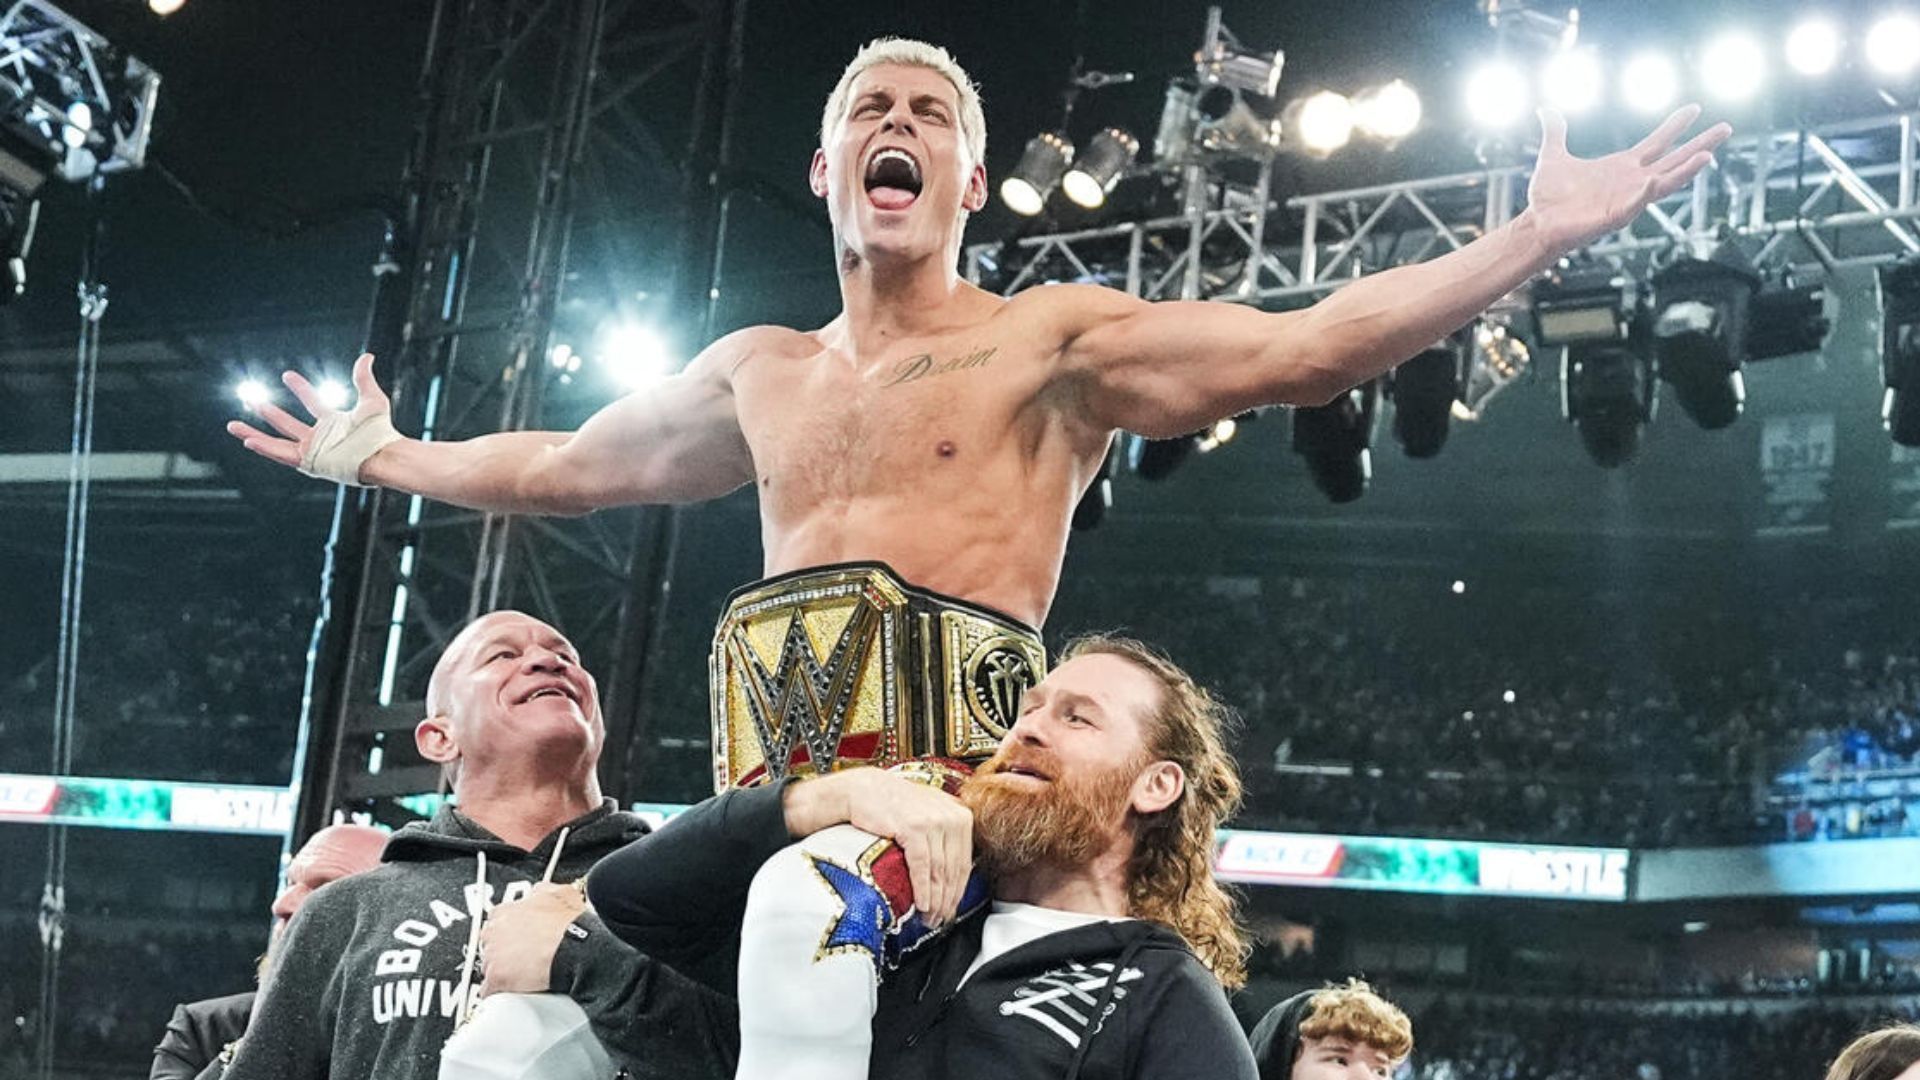 Rhodes finished his story last night at WrestleMania.